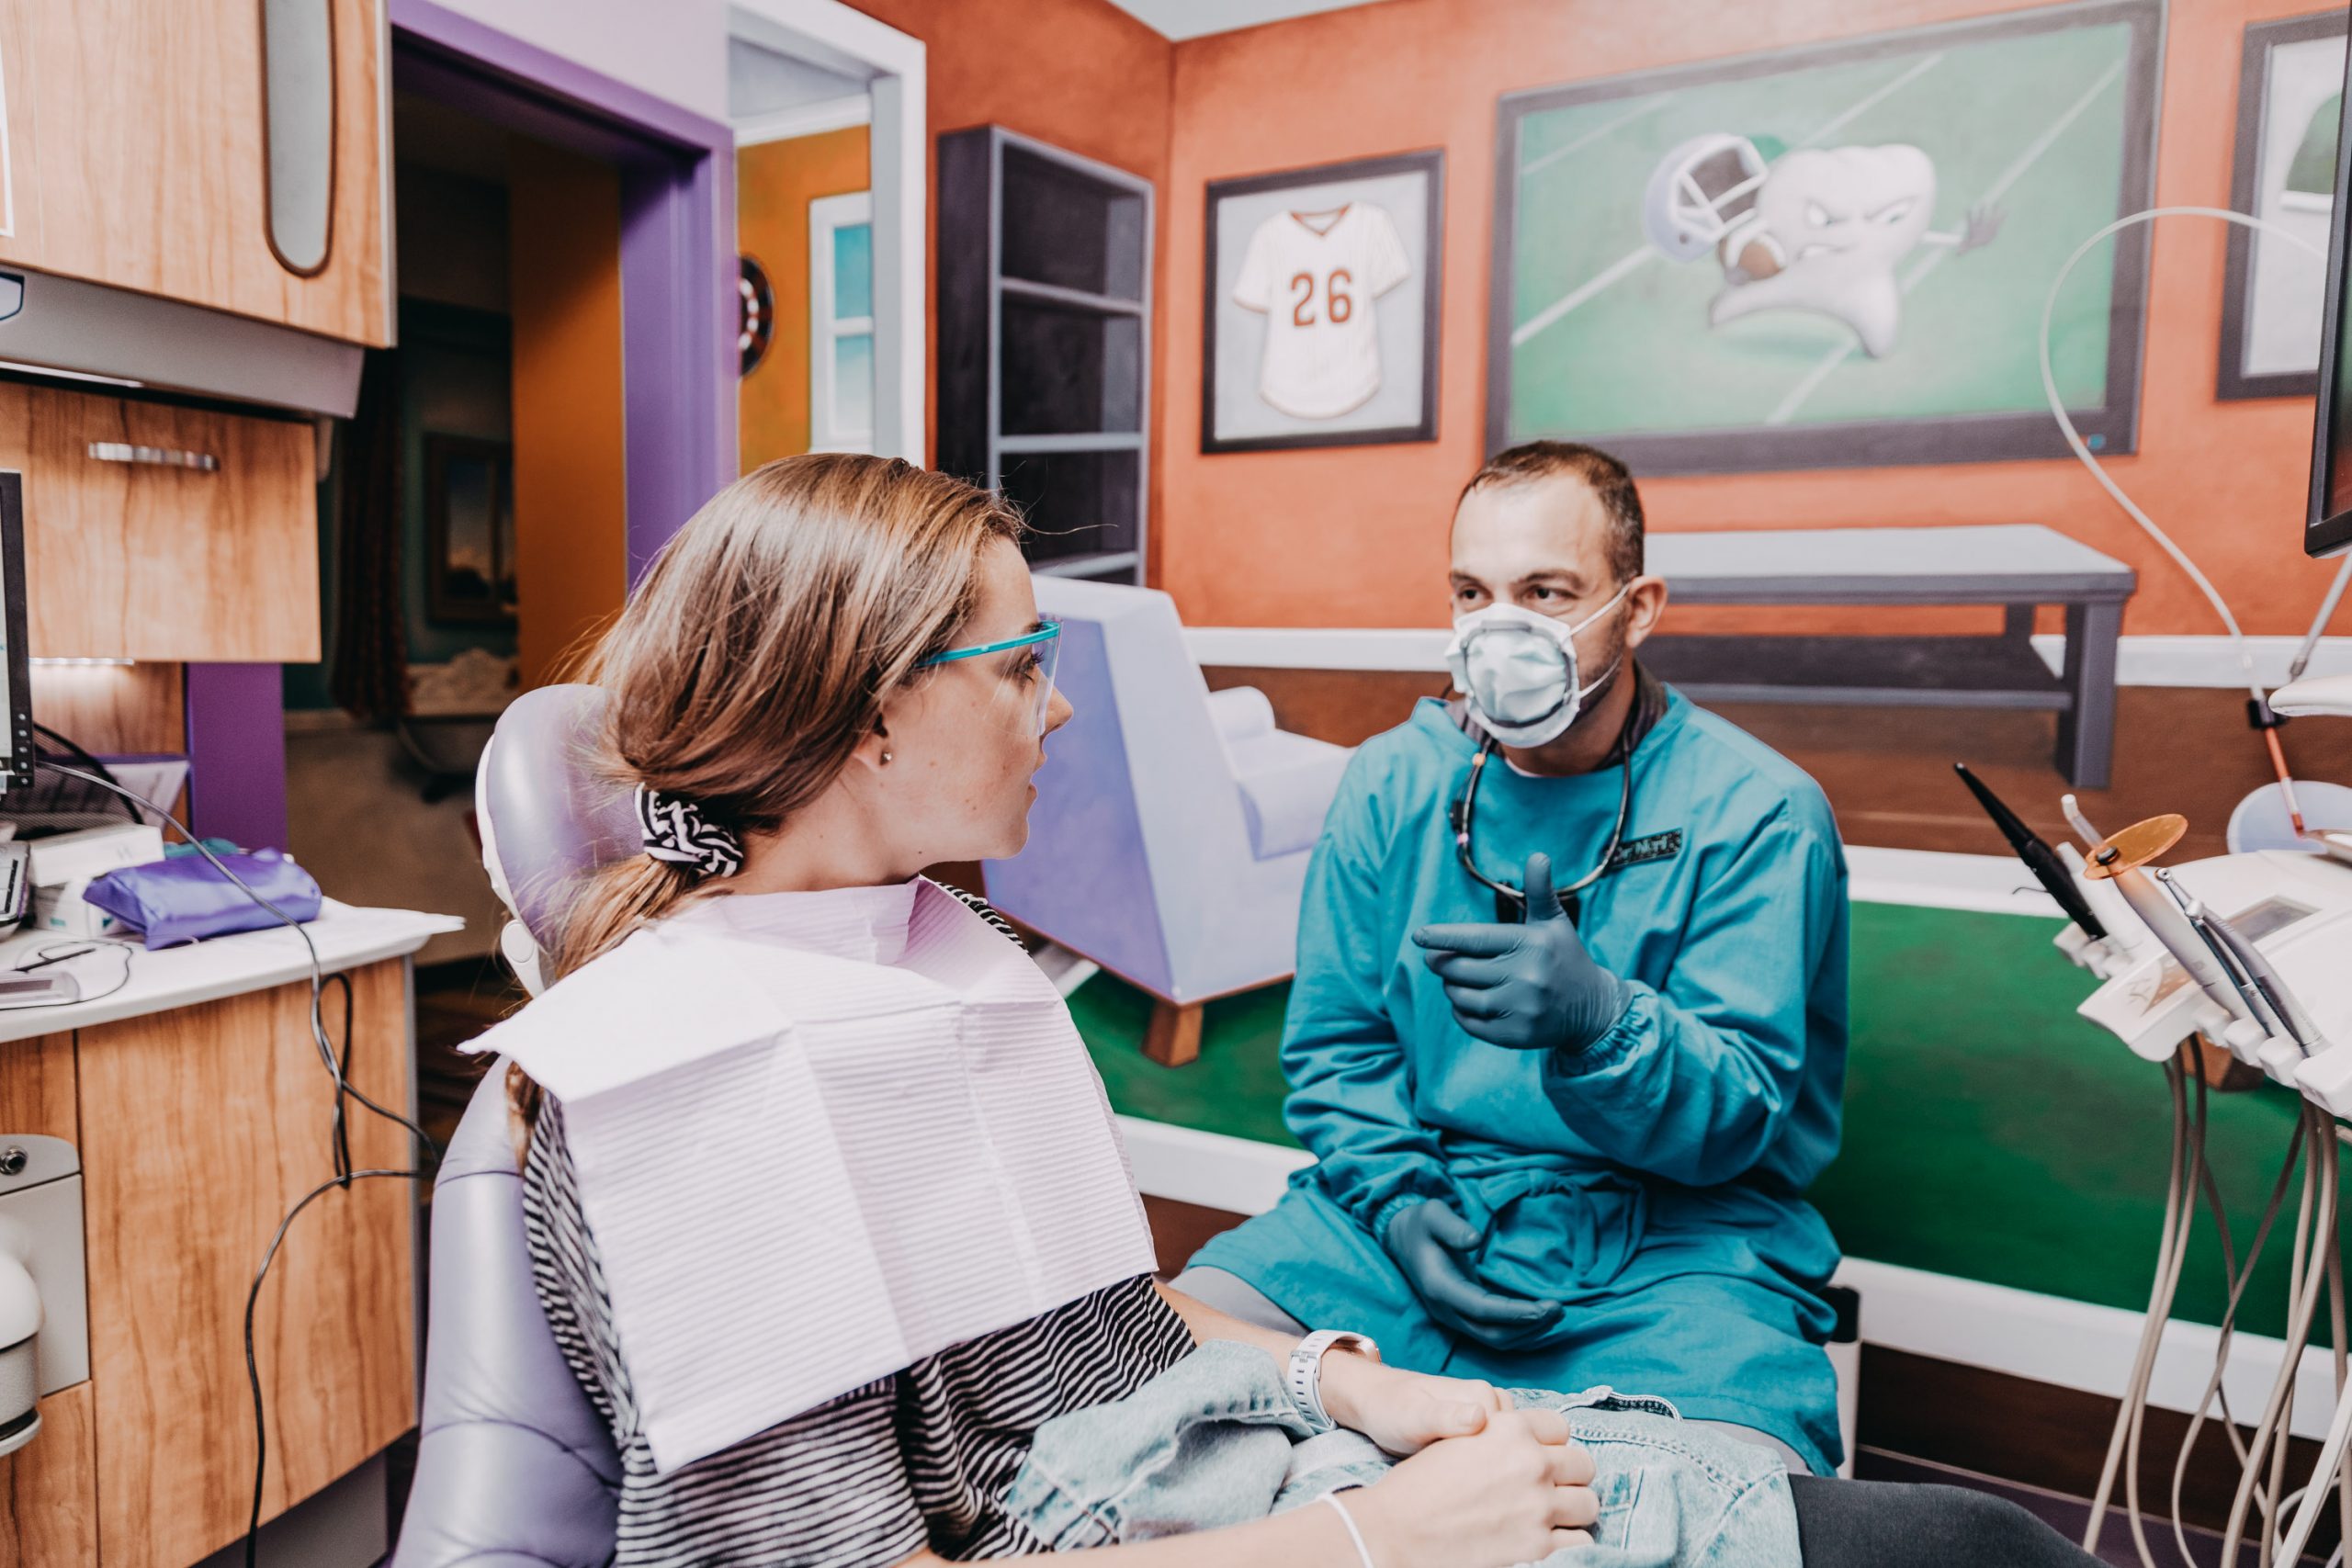 Male dentist wearing facemask and personal protective equipment (PPE) talks to female patient during dentist appointment.